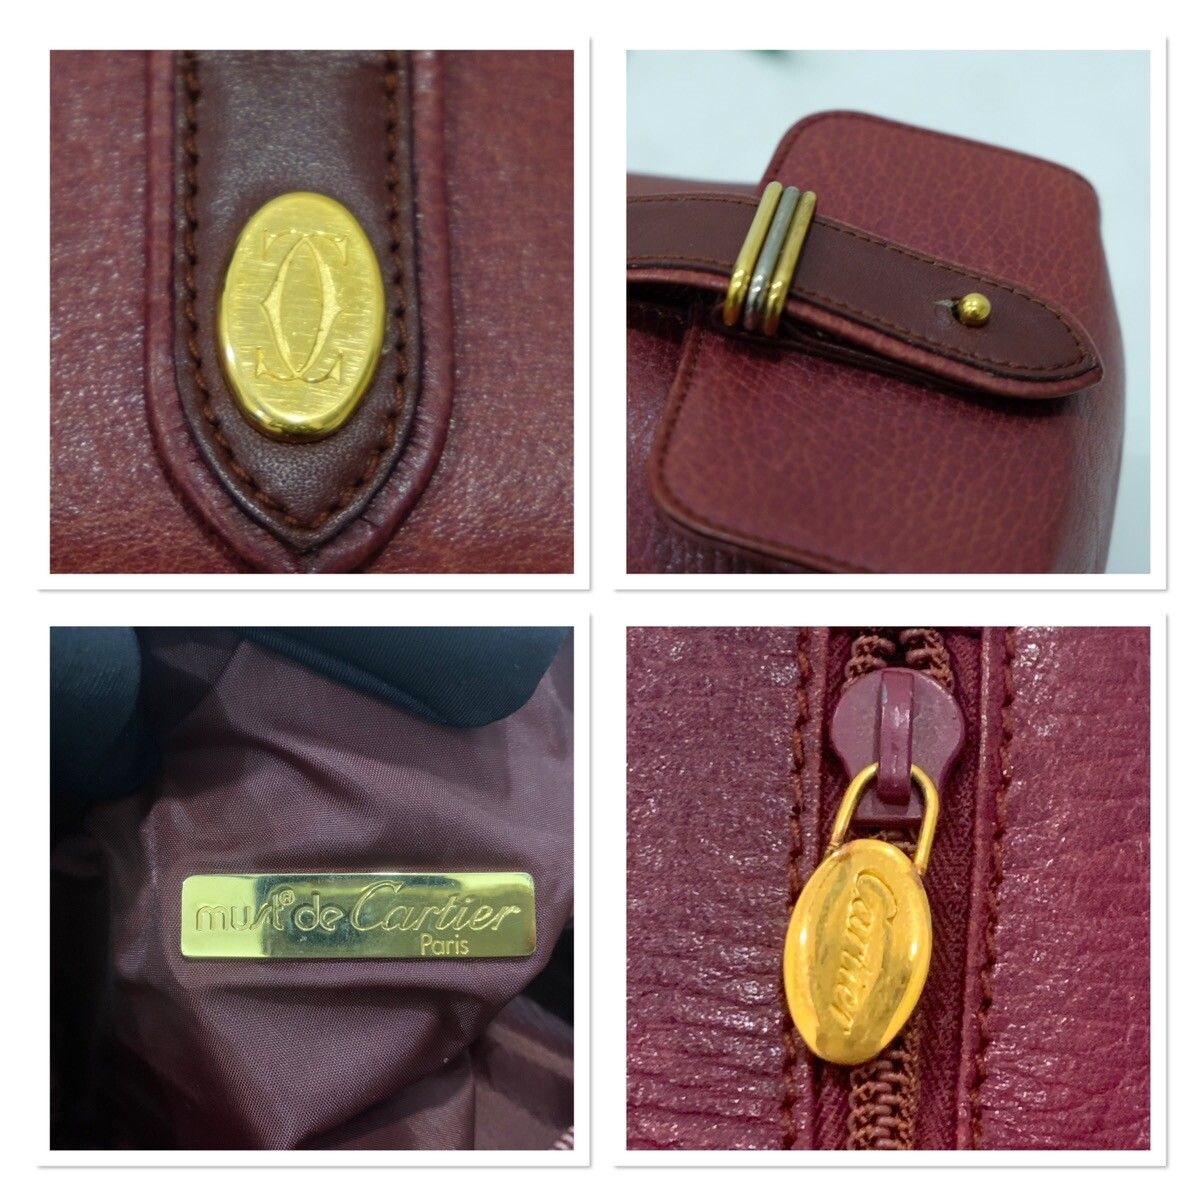 Cartier cosmetic/toiletries leather bag - 11